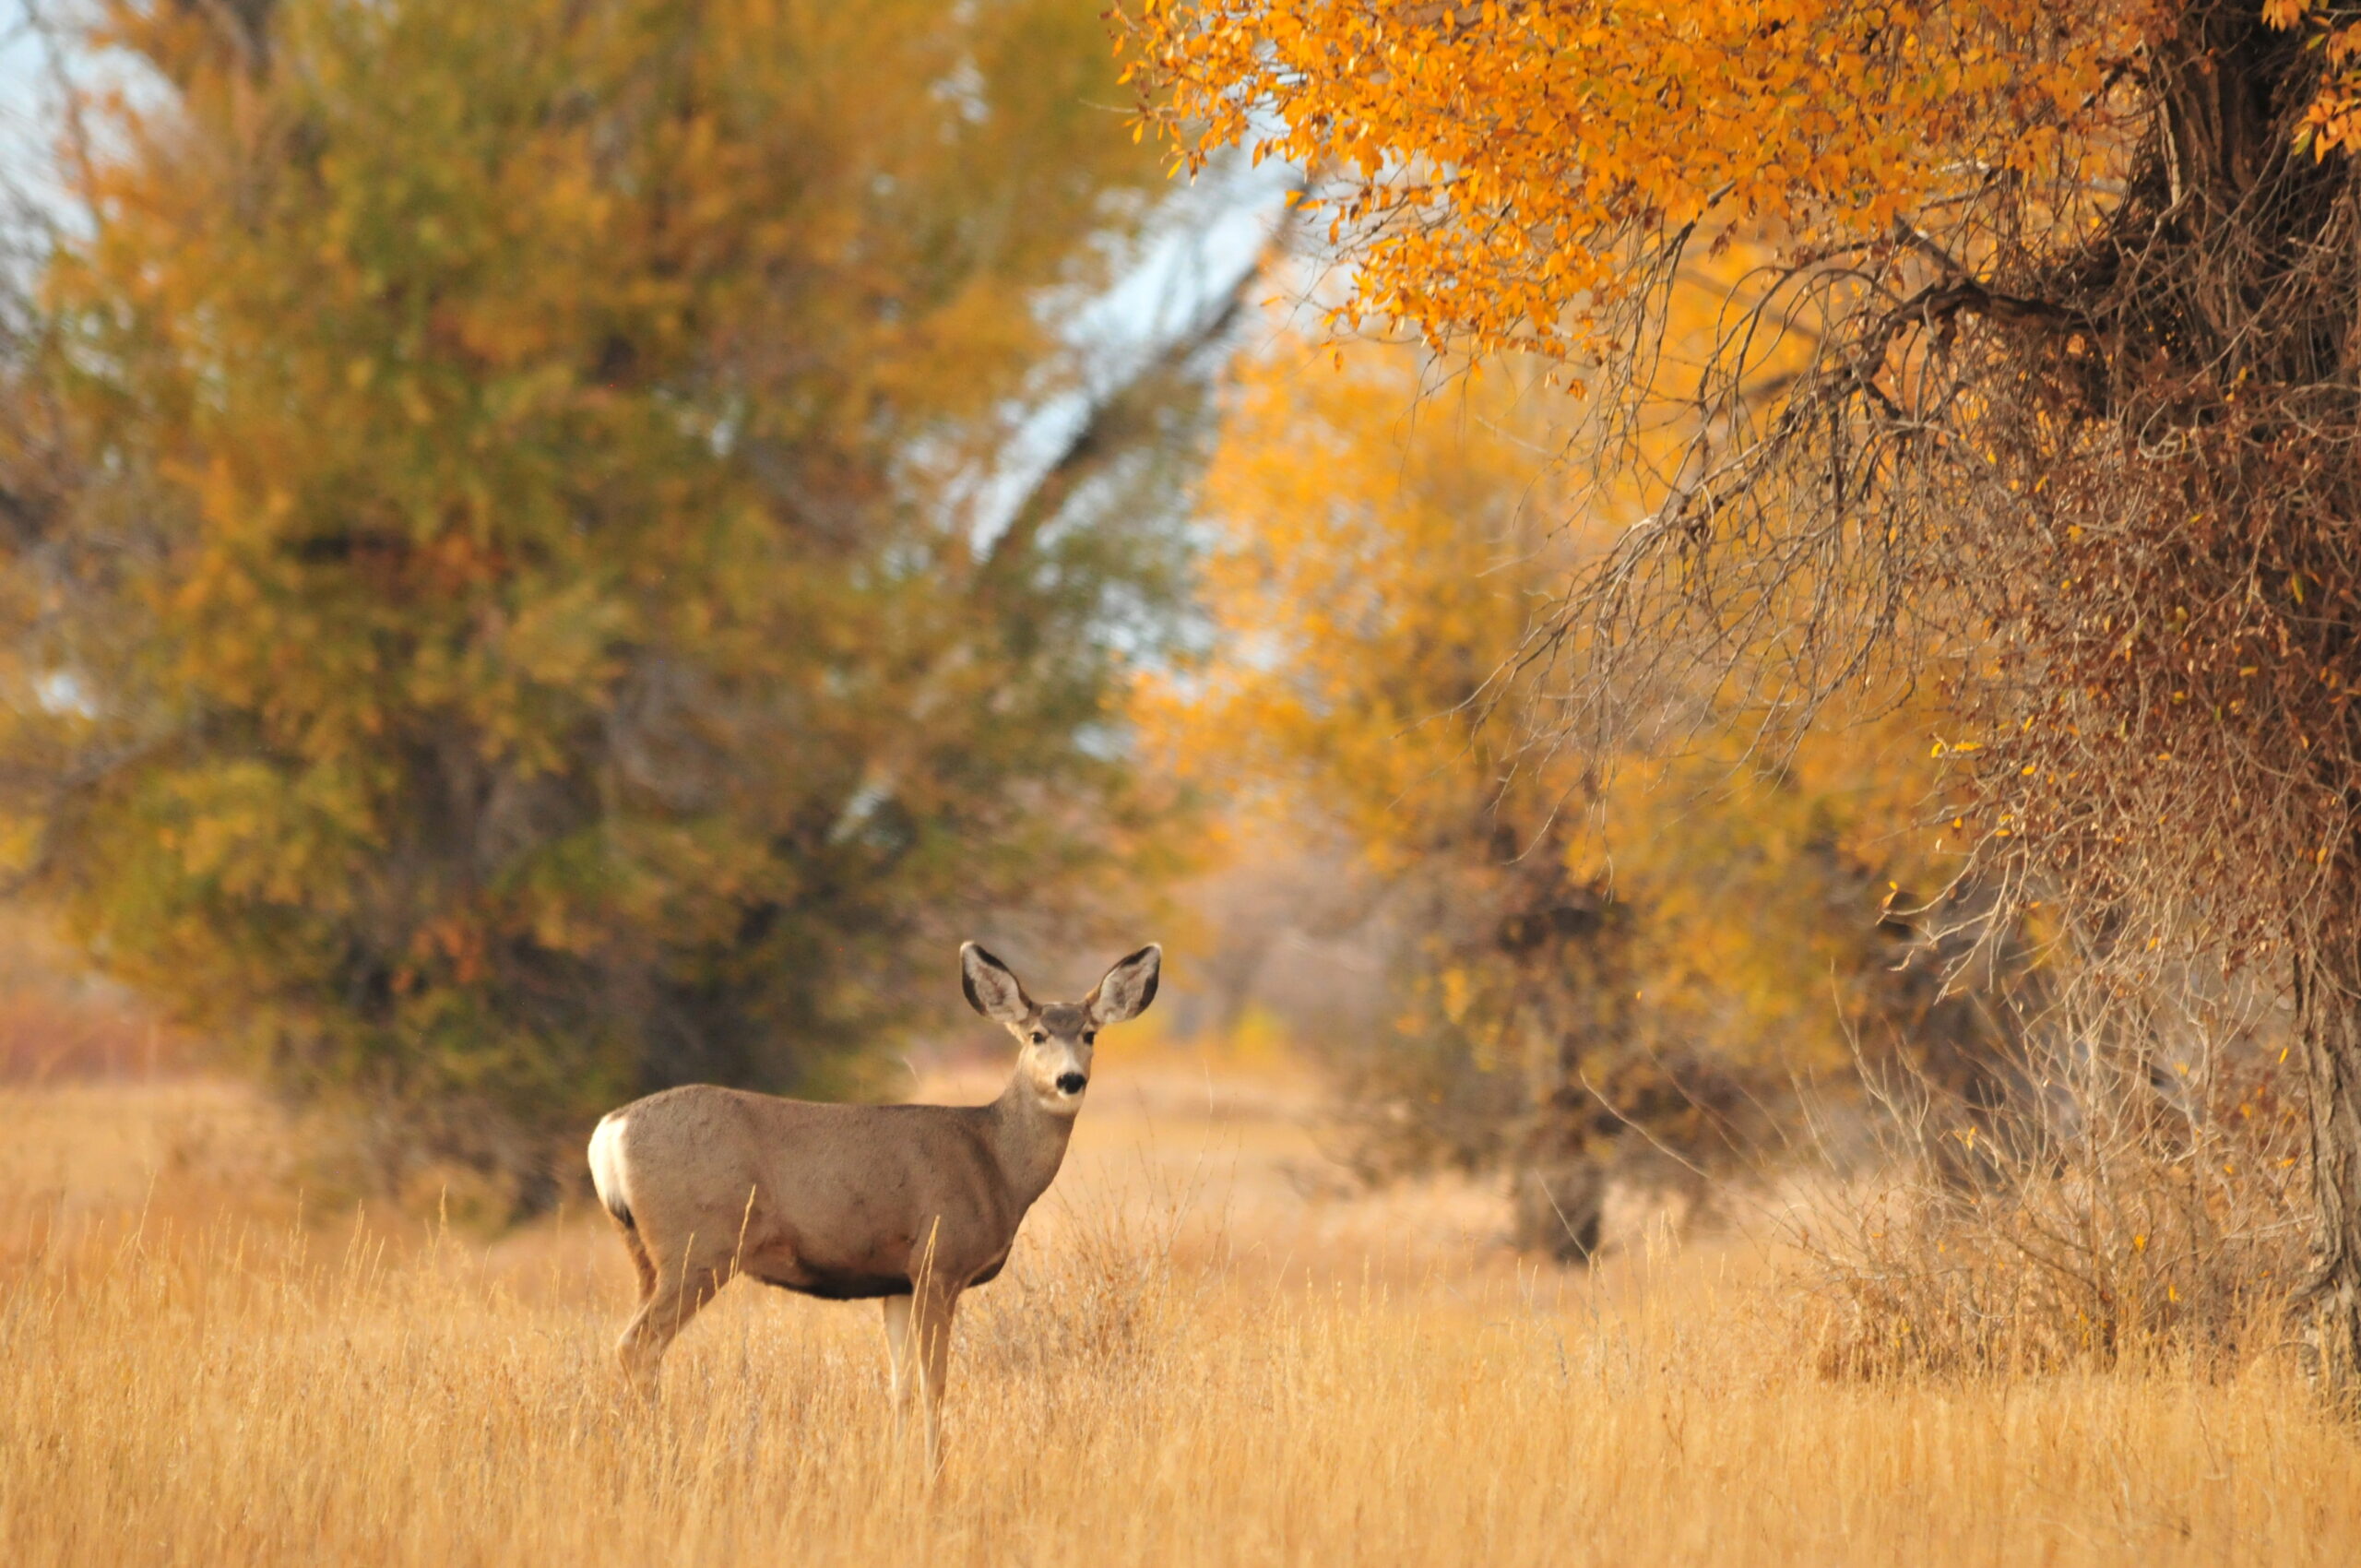 NAWA would help fund mule deer and other wild game habitat.